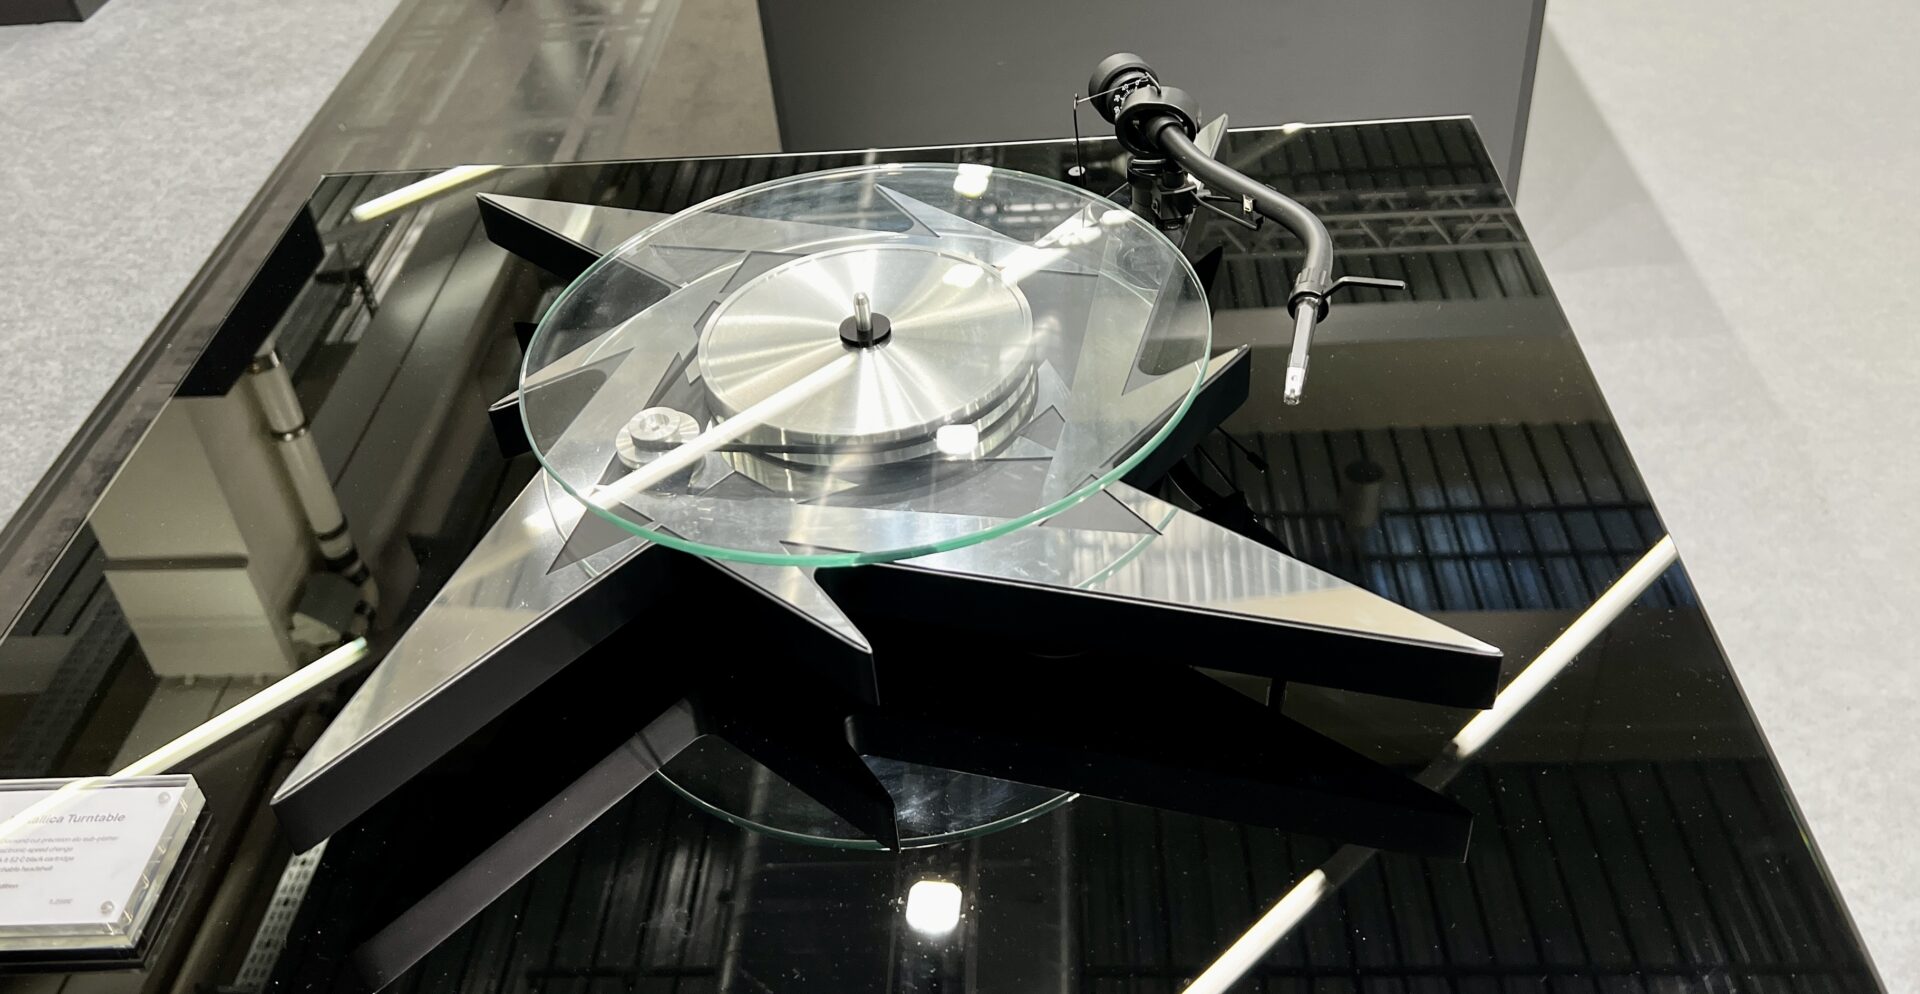 High-End 2022 Pro-Ject Metallica Turntable